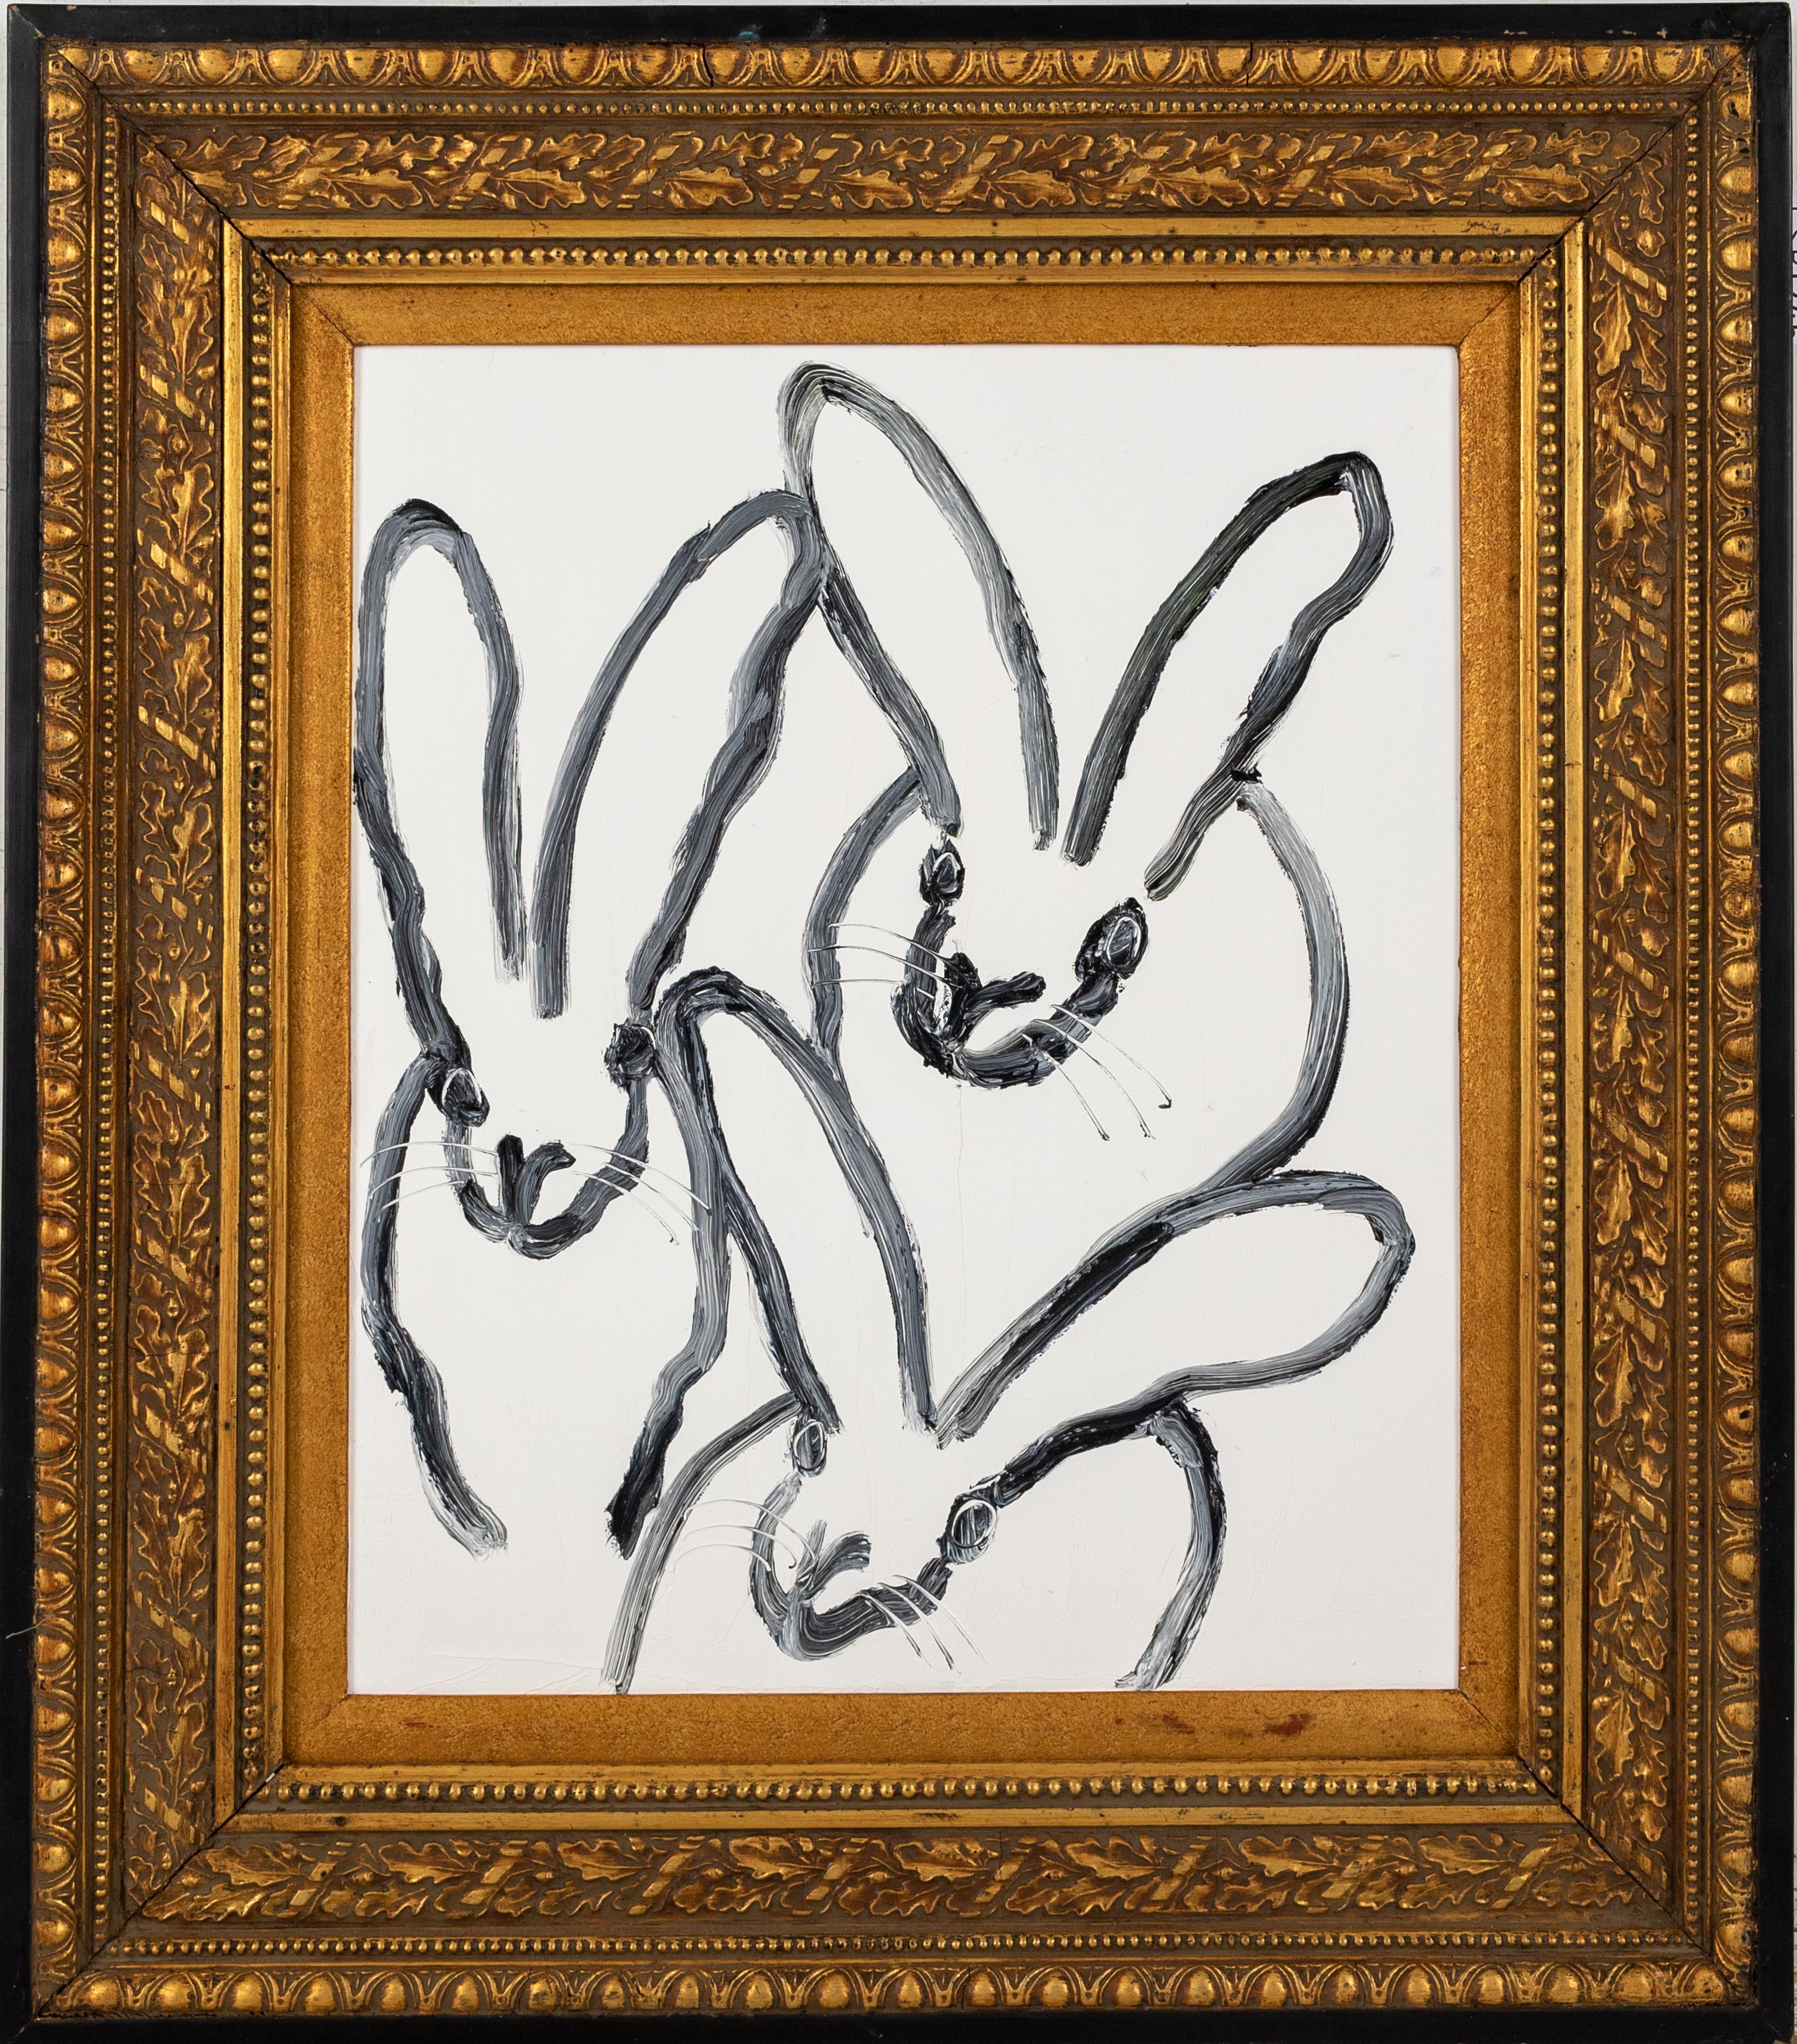 Hunt Slonem "3 Play" Three Bunnies
Three black gestured bunnies on a white background in an antique frame

Unframed: 10 x 8 inches  
Framed: 13.38 x 11.38 inches
*Painting is framed - Please note that not all Hunt Slonem frames are not in mint